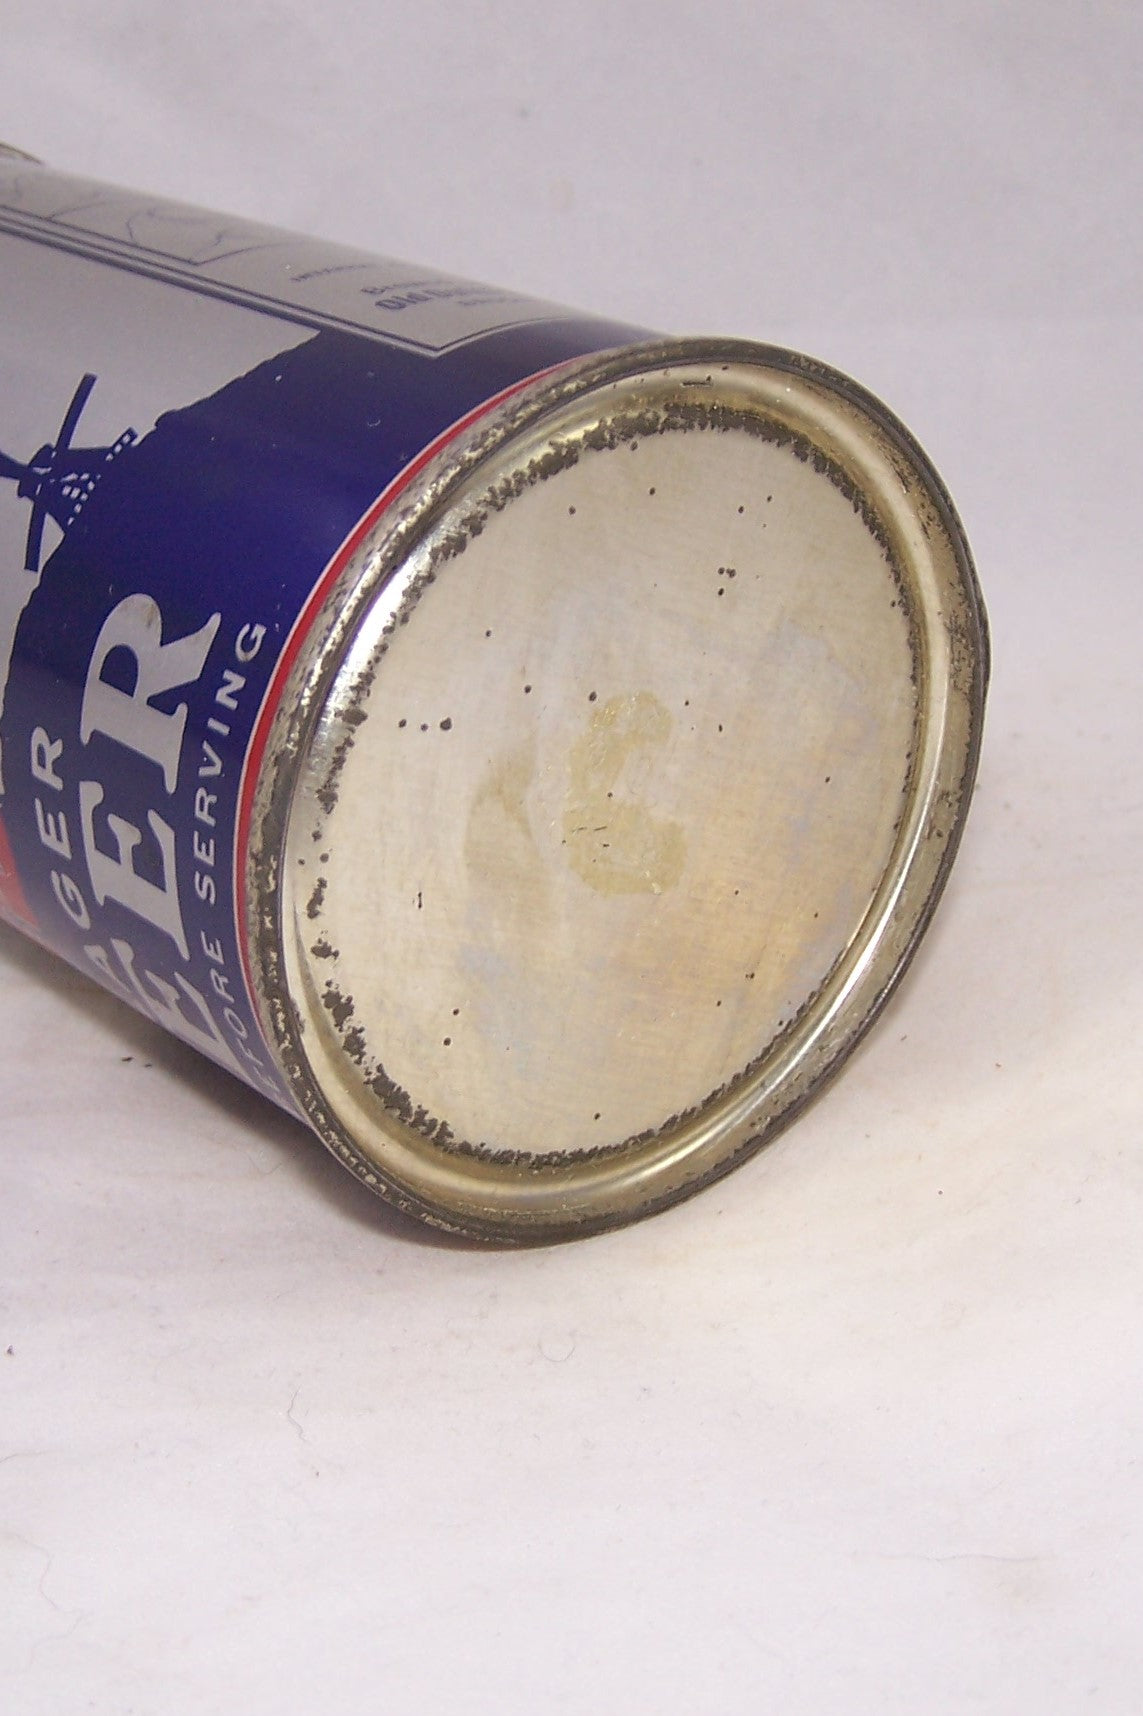 Old Dutch Brand Lager Beer, Lilek # 599 and USBC 105-35, Grade 1/1+ Sold on 04/05/19